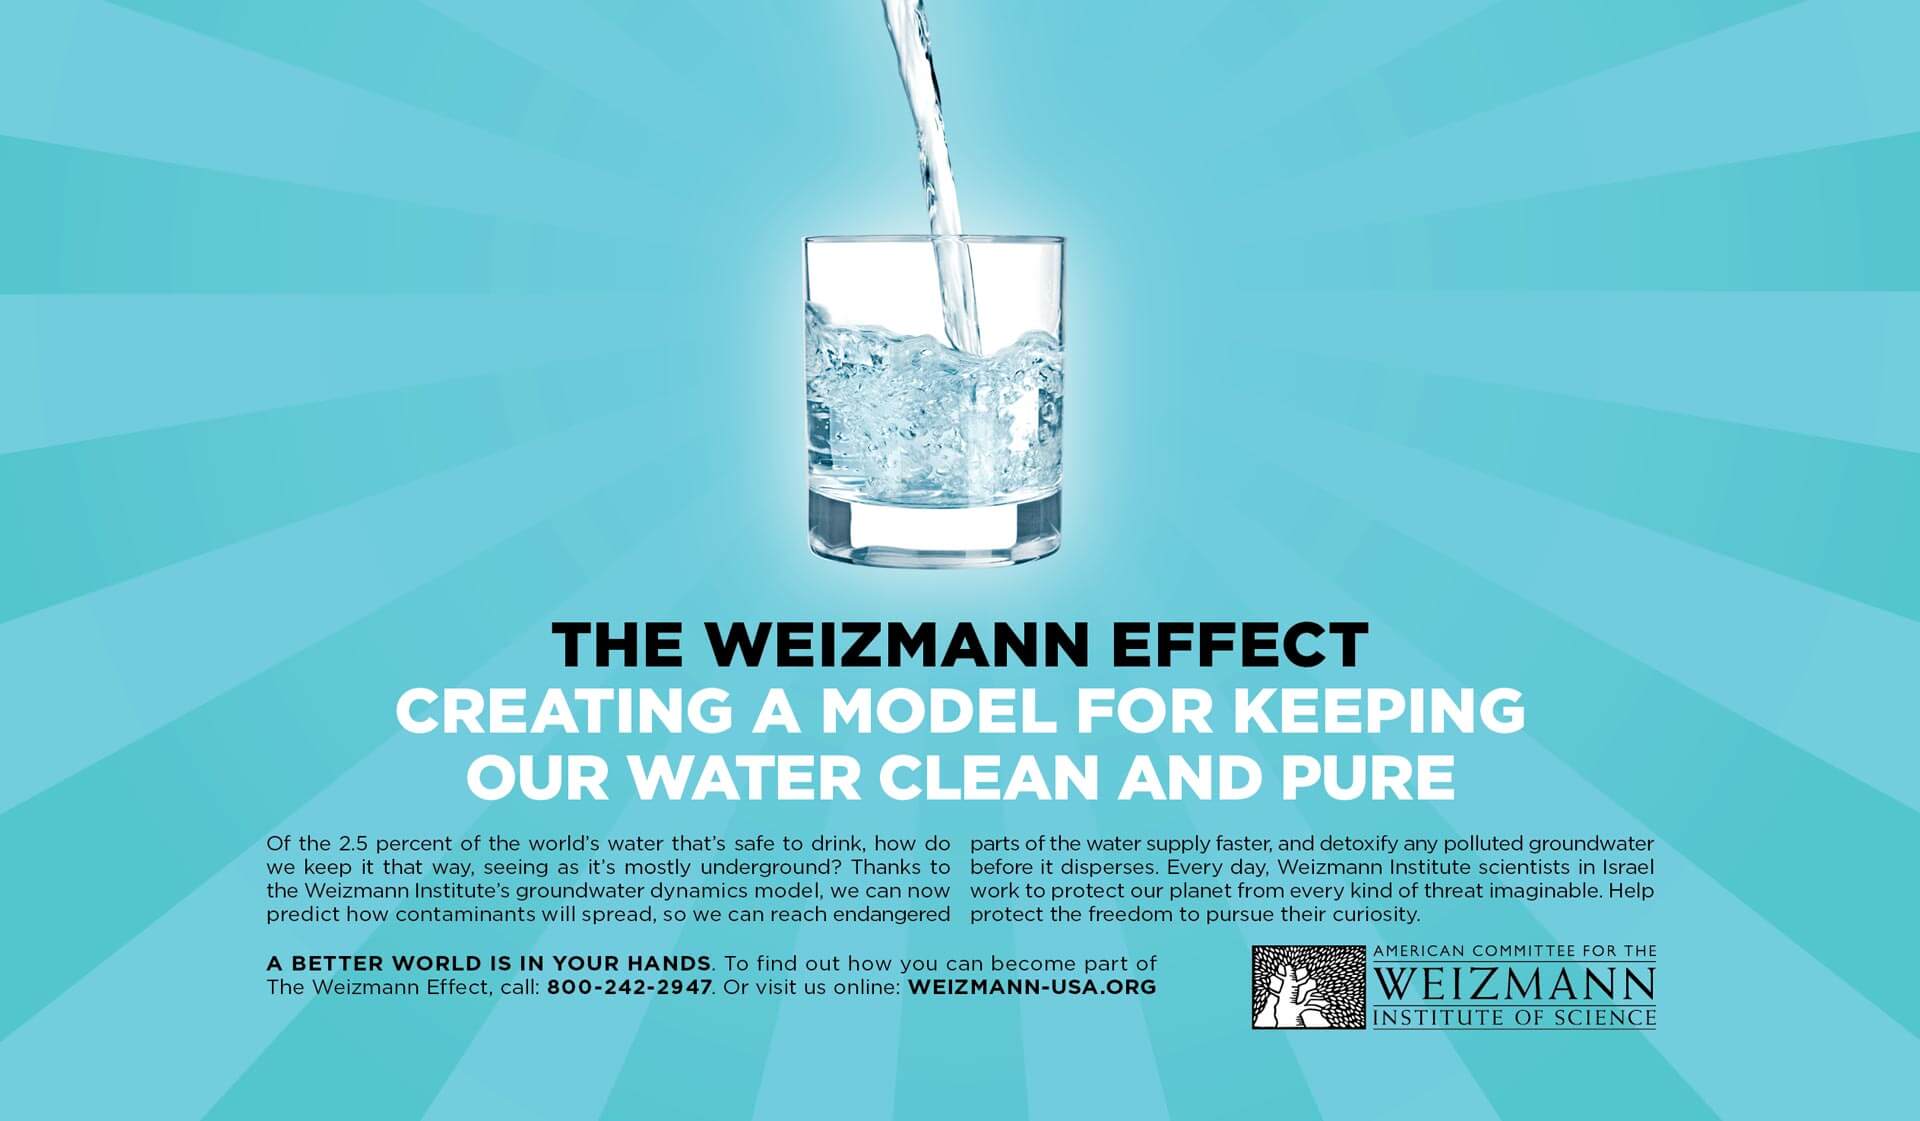 The American Committee for The Weizmann Institute of Science. A better world is in your hands